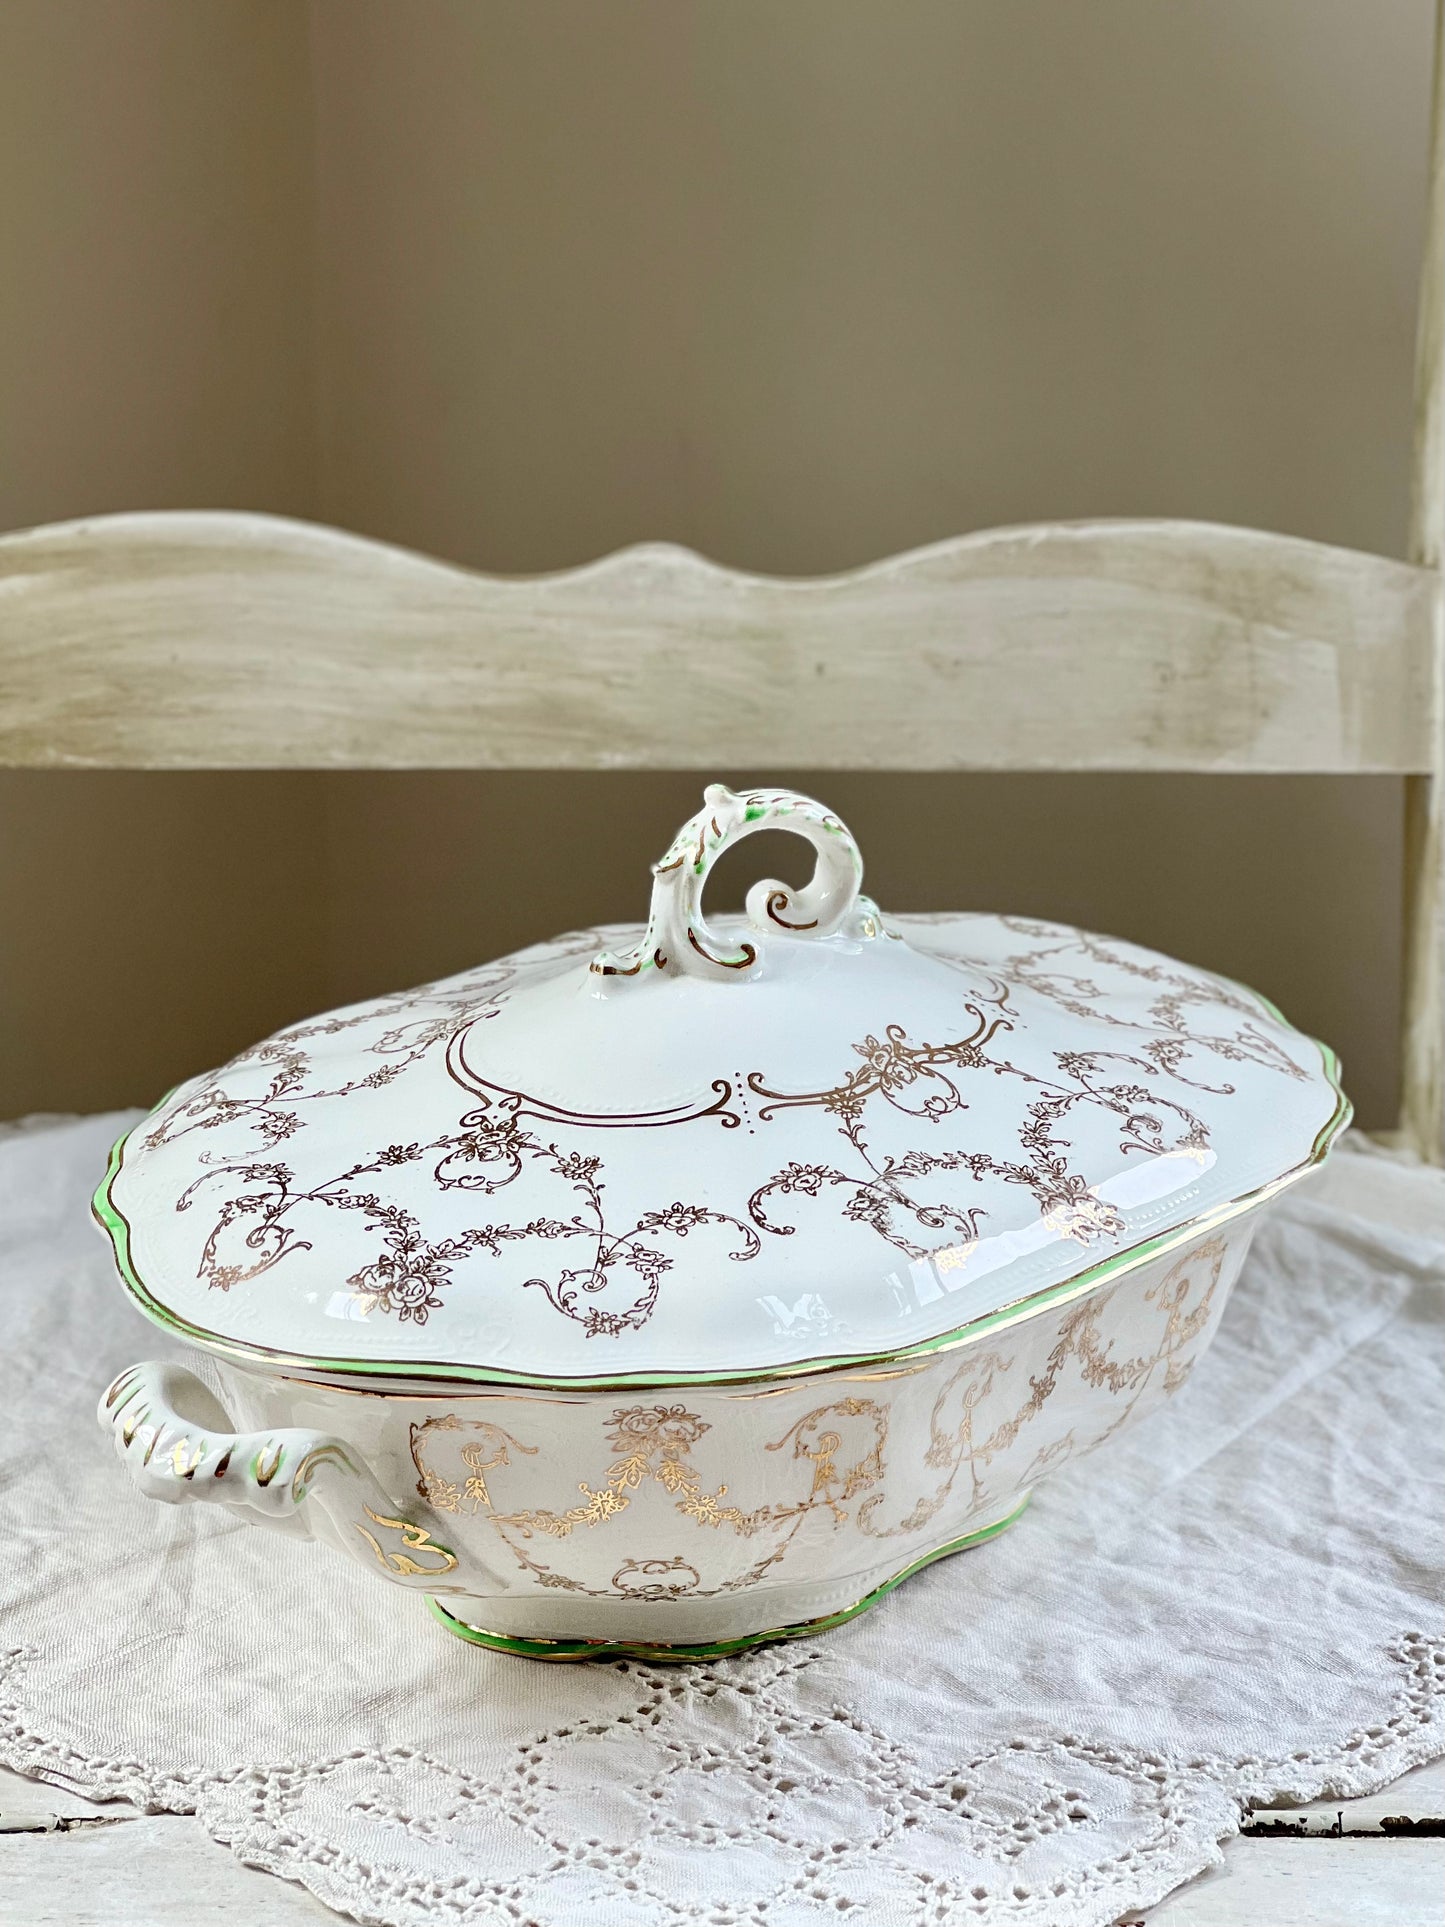 Antique Covered Dish by Ridgways of England